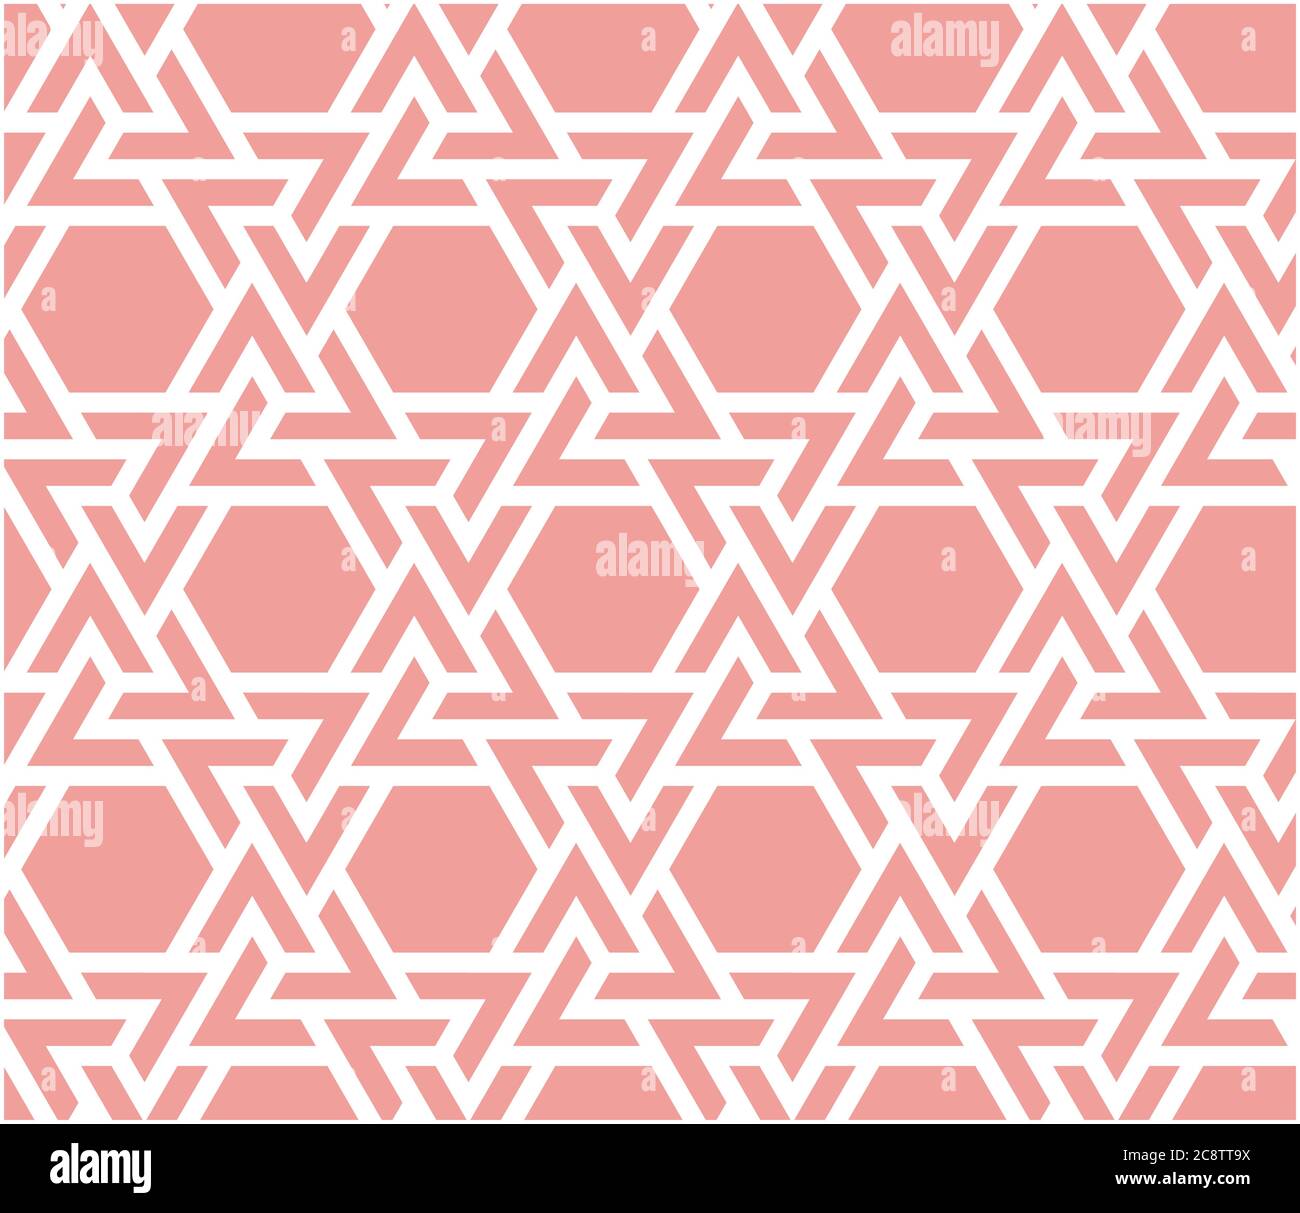 Living coral arabesque vector seamless pattern. Geometric halftone texture with color tile disintegration. Coral color texture, background, wallpaper Stock Vector